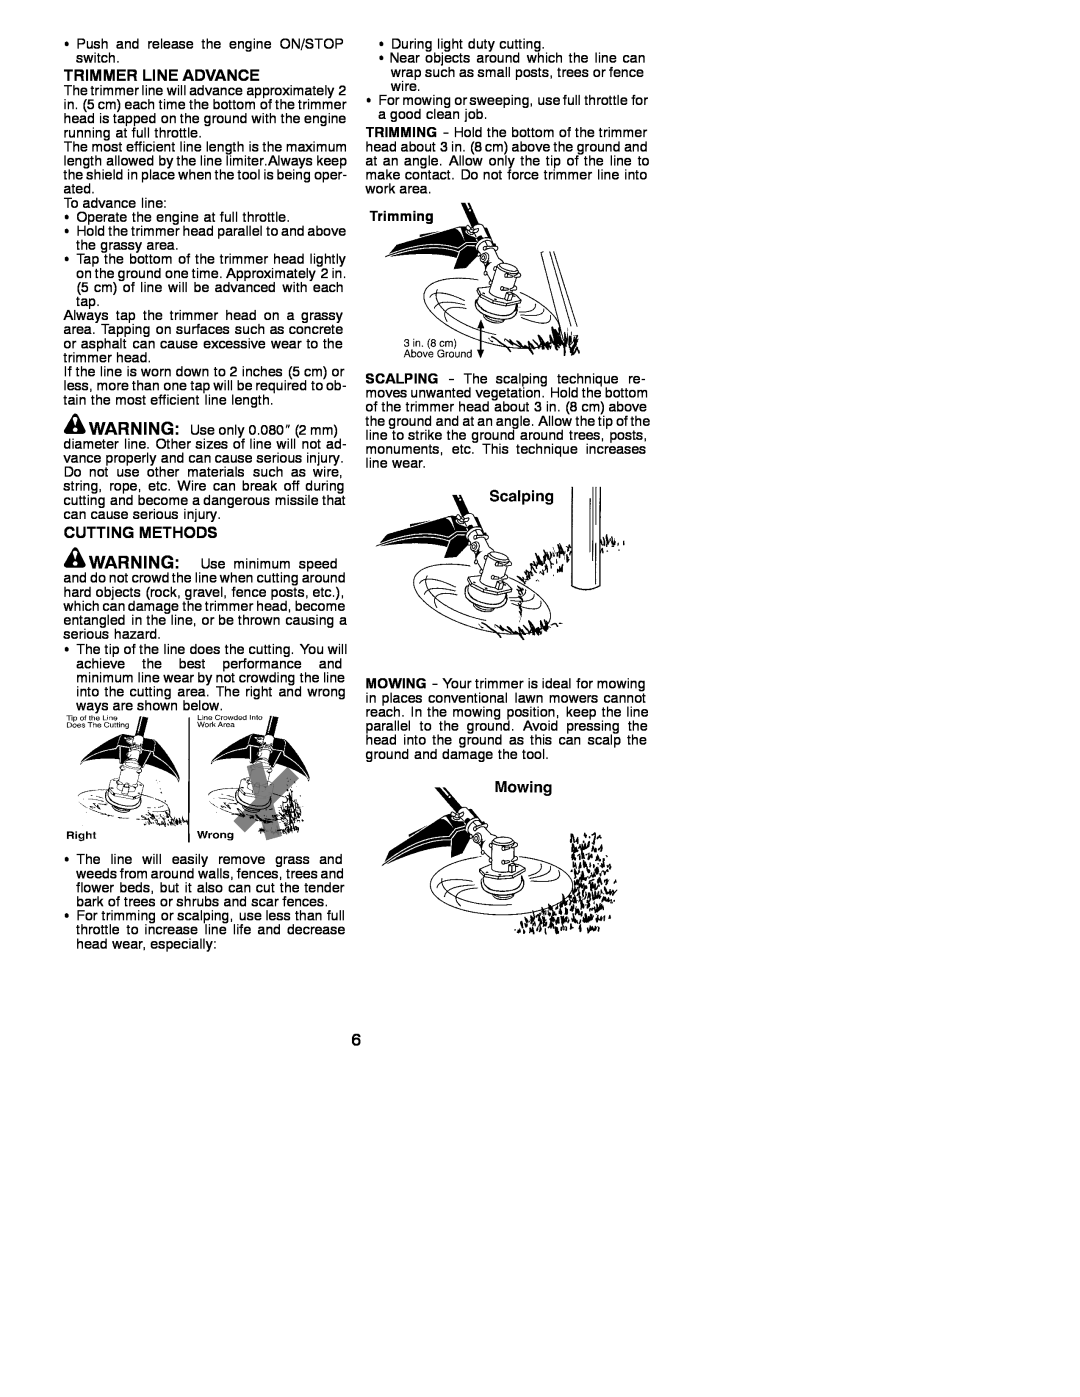 Weed Eater 530086923 instruction manual Trimmer Line Advance, Cutting Methods, Trimming 